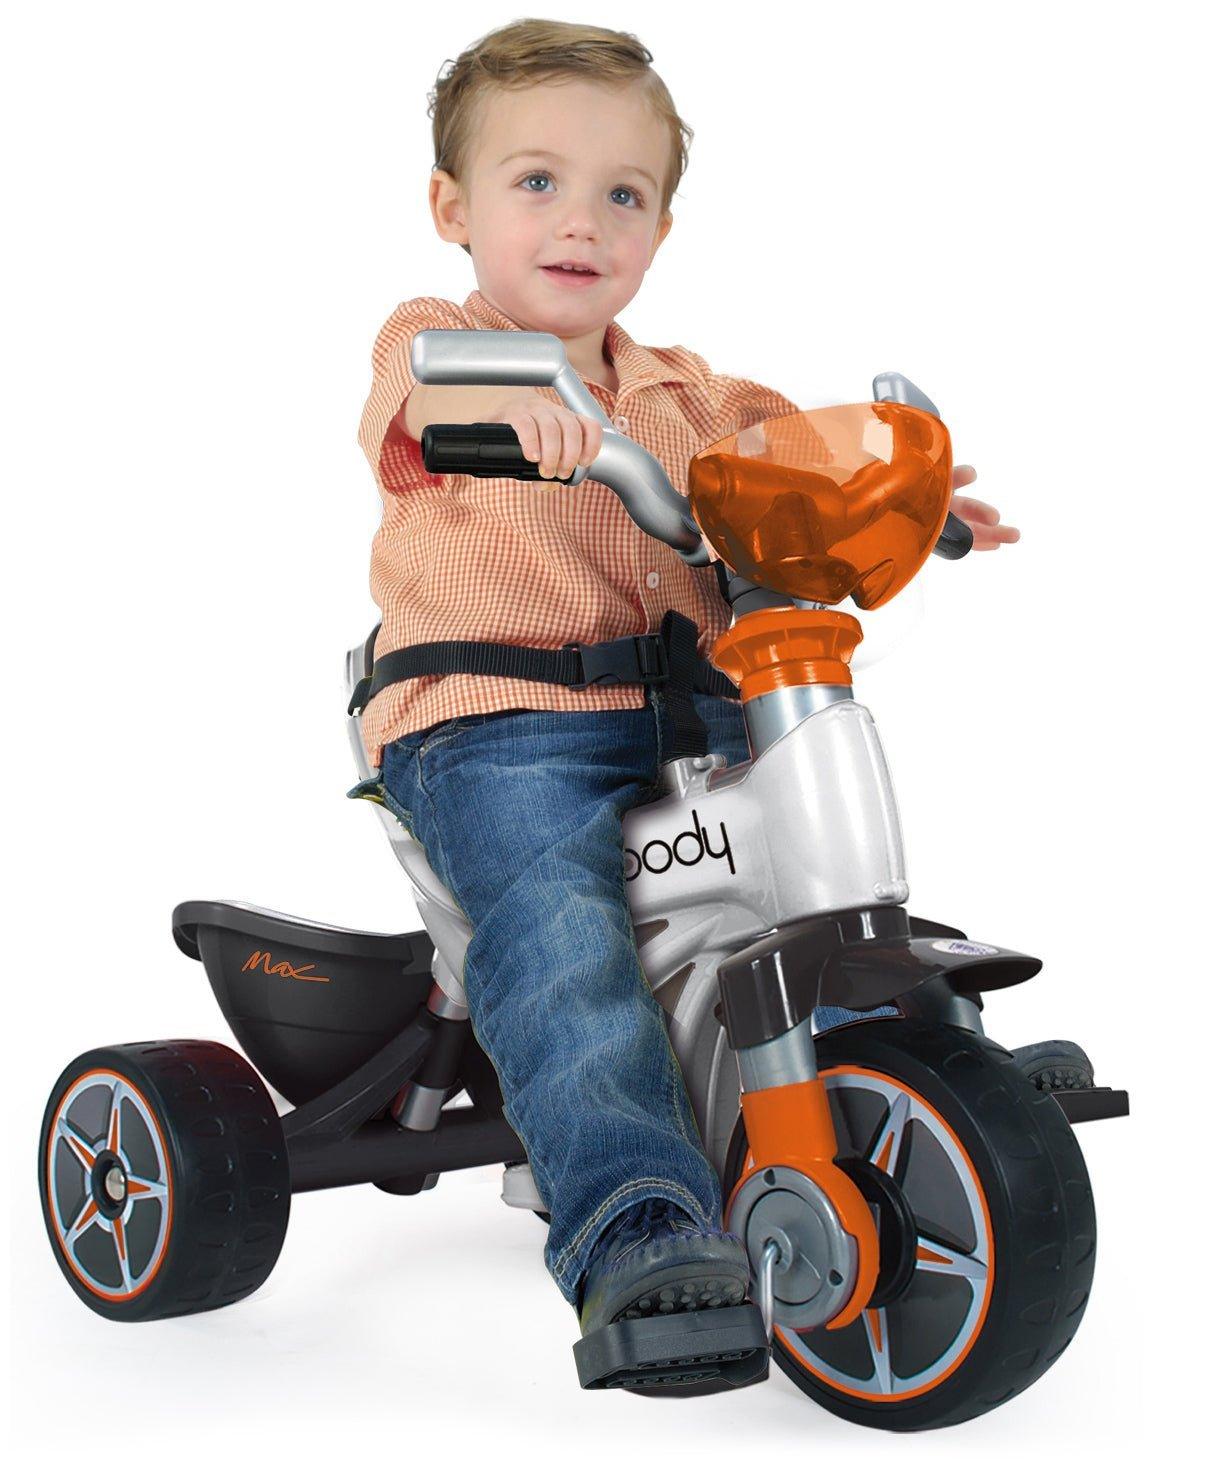 PATOYS | Injusa | Trike Body Max for Babies from 10 Months, with Parental Control of Direction - 3254 Tricycles Injusa